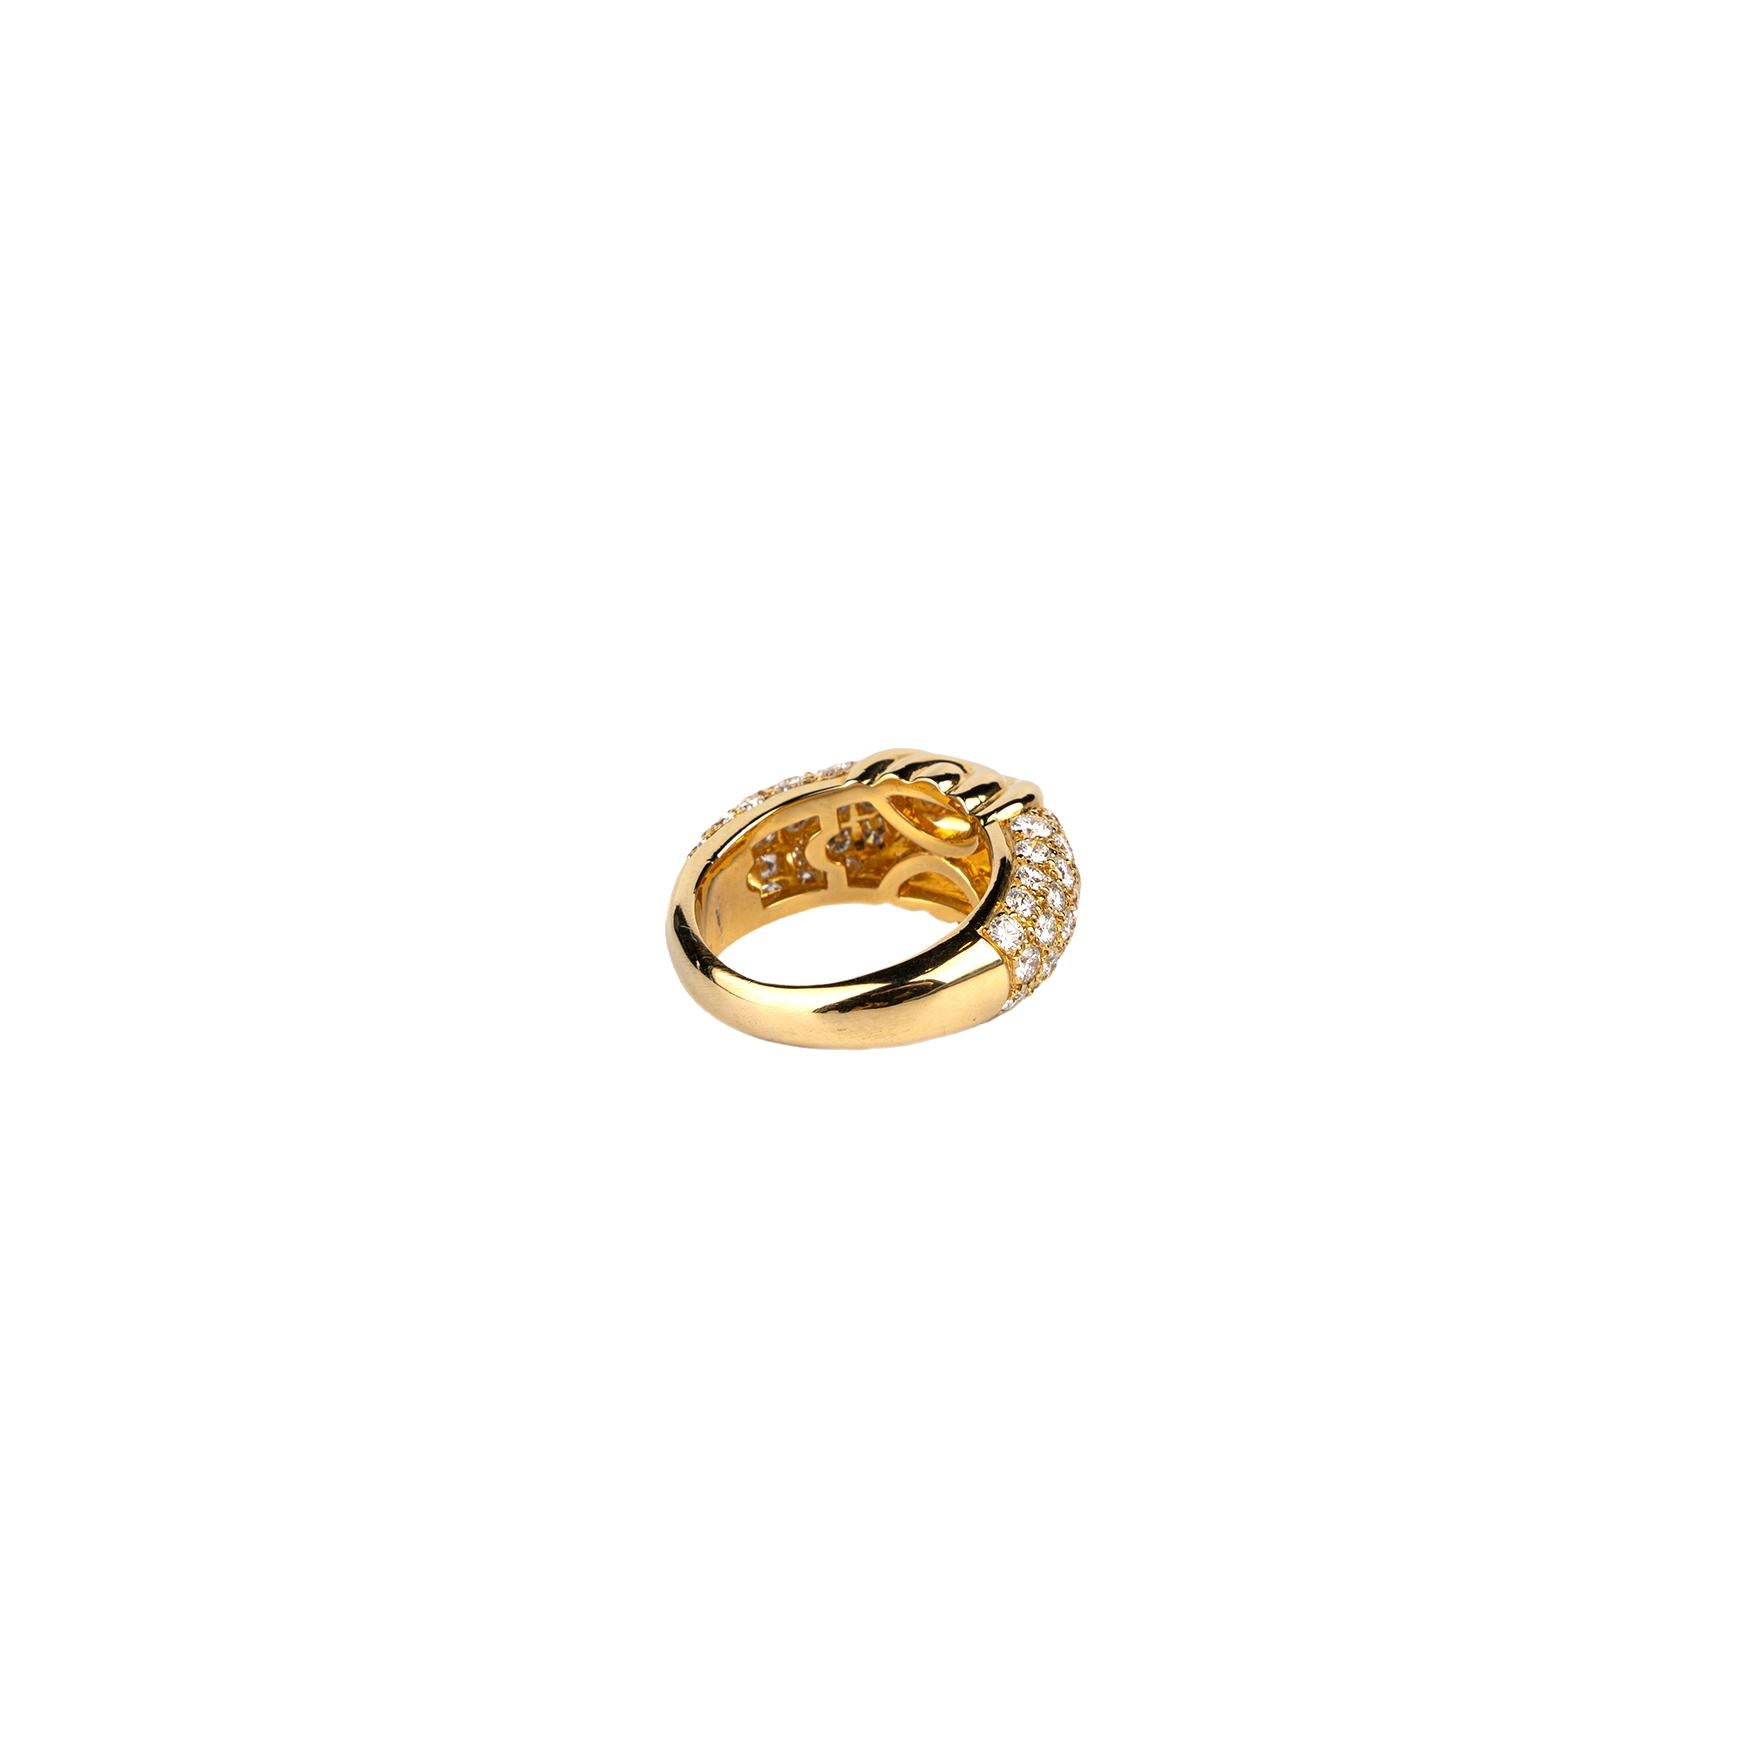 Bulgari Pavé Diamond and 18k Gold 'Doppio Cuore' Style Ring In Excellent Condition For Sale In New York, NY